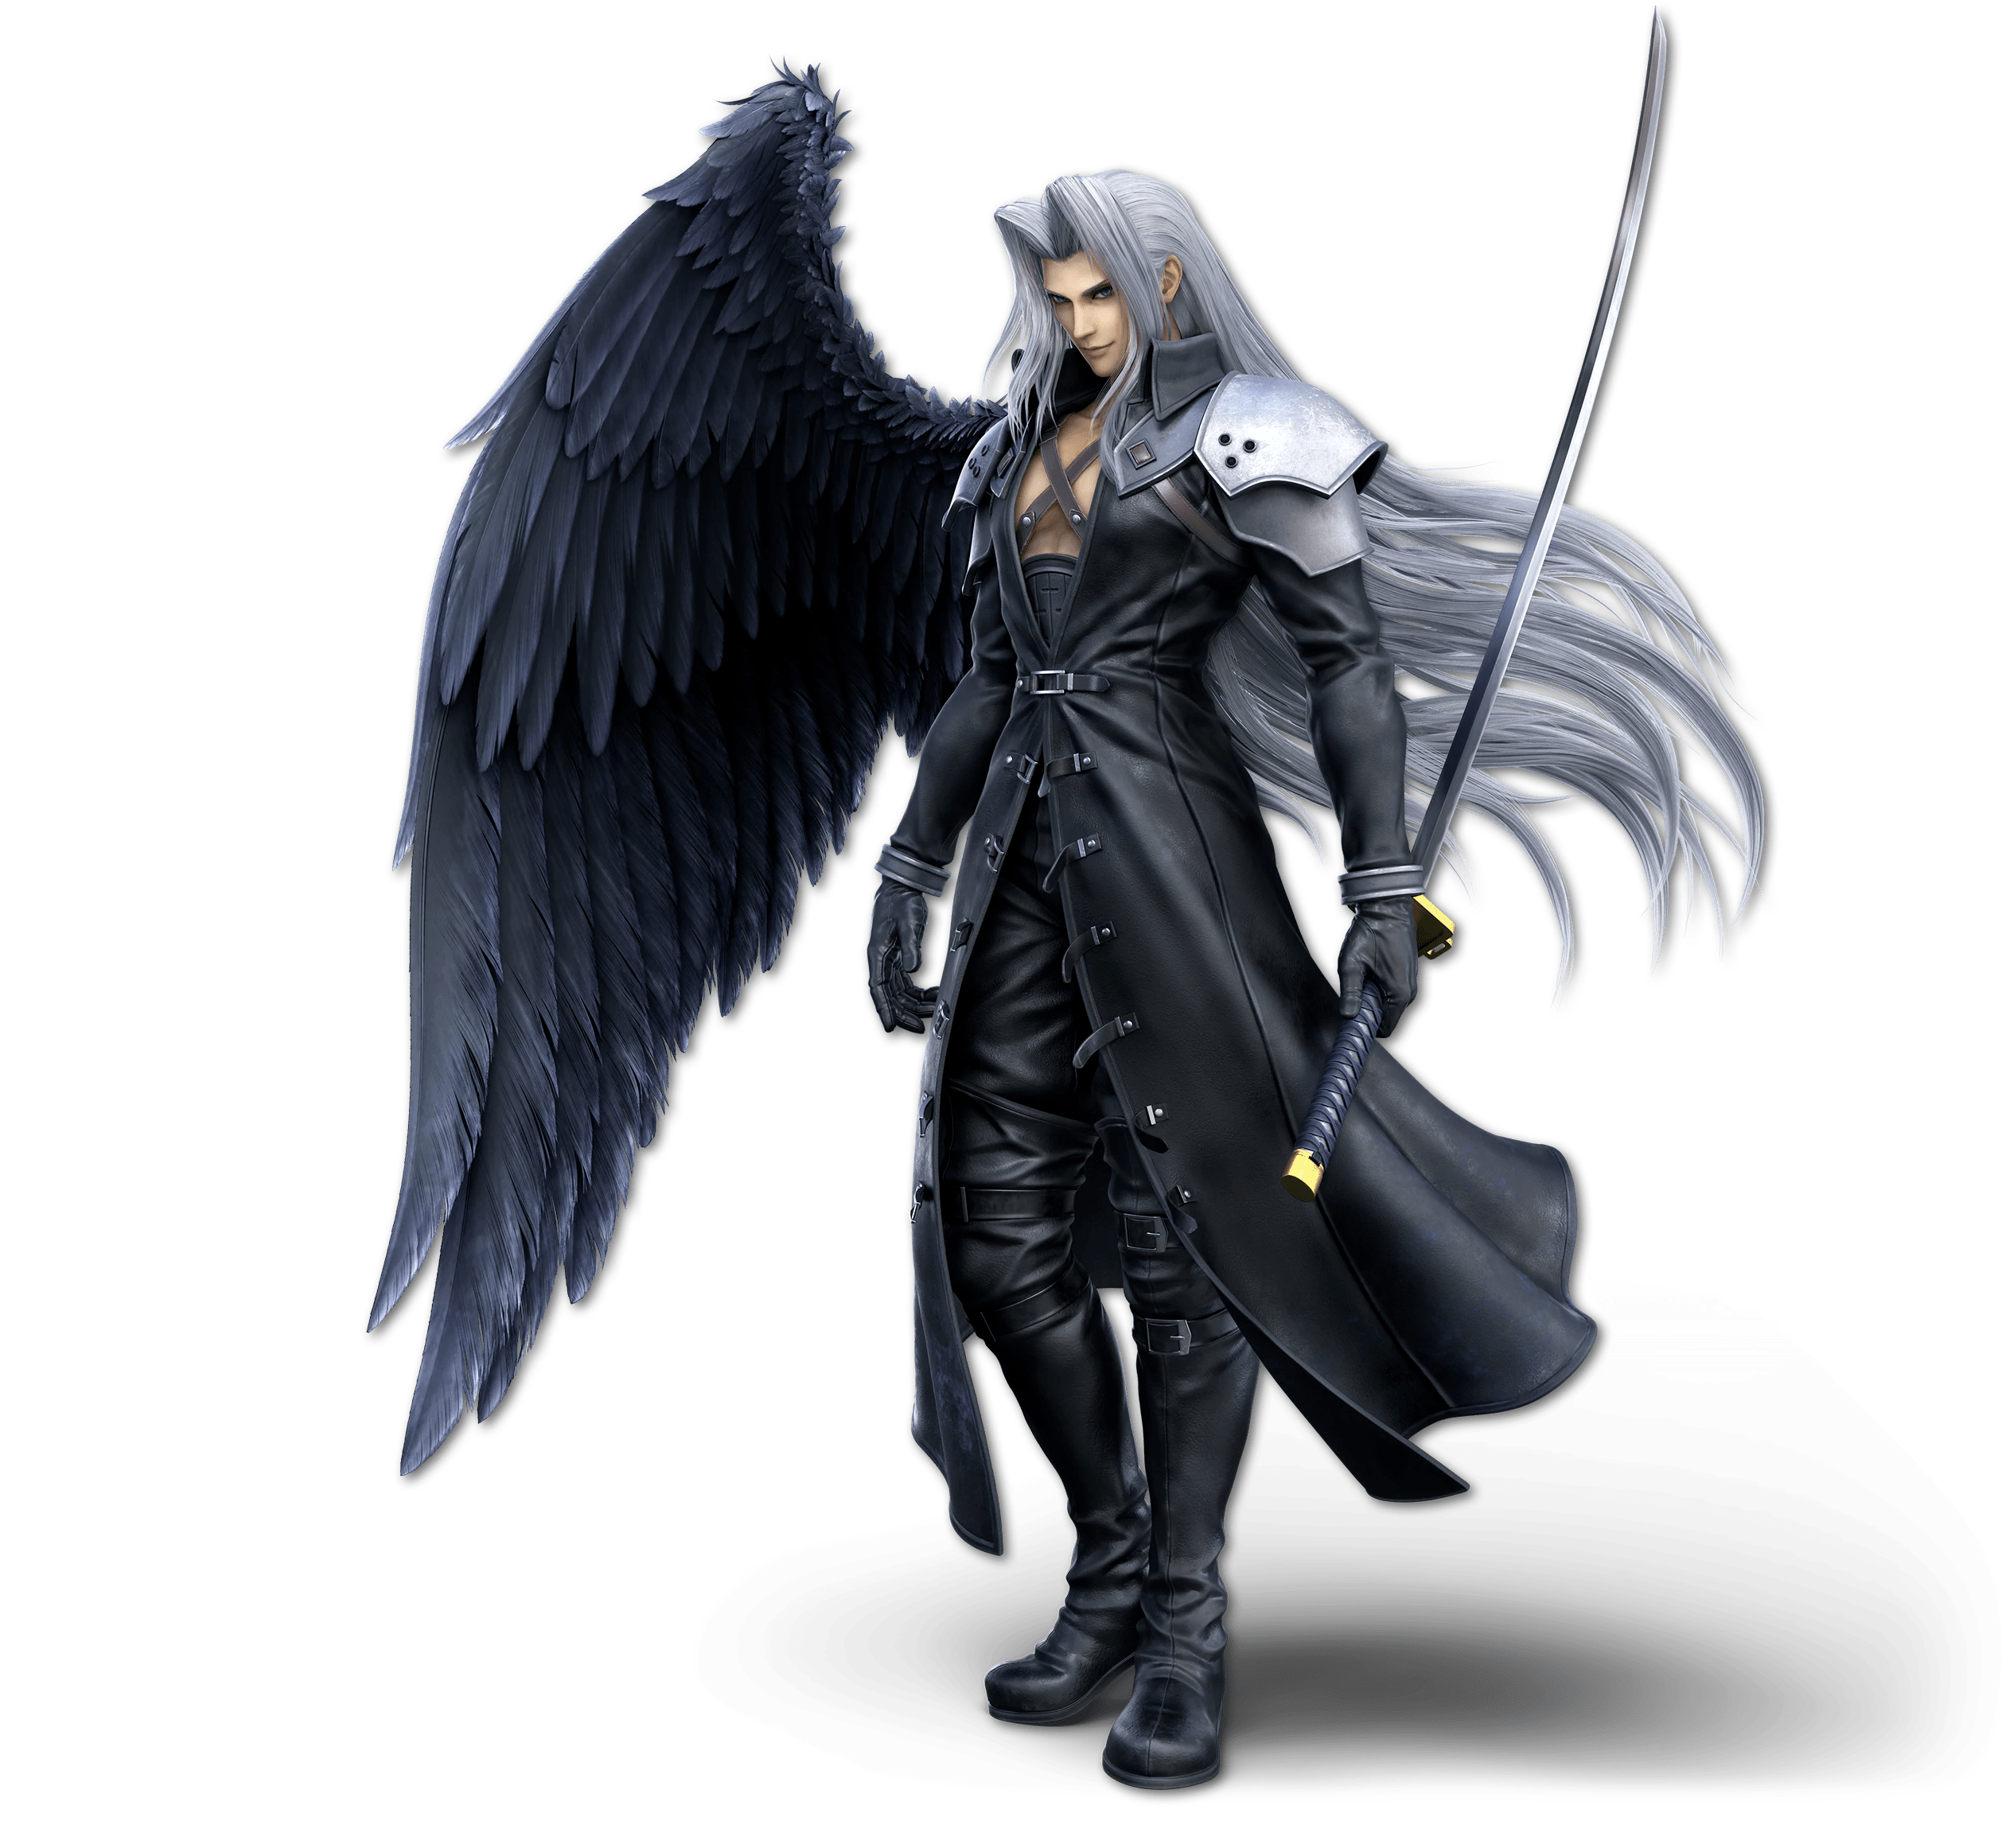 How to counter Sephiroth with Mario in Super Smash Bros. Ultimate